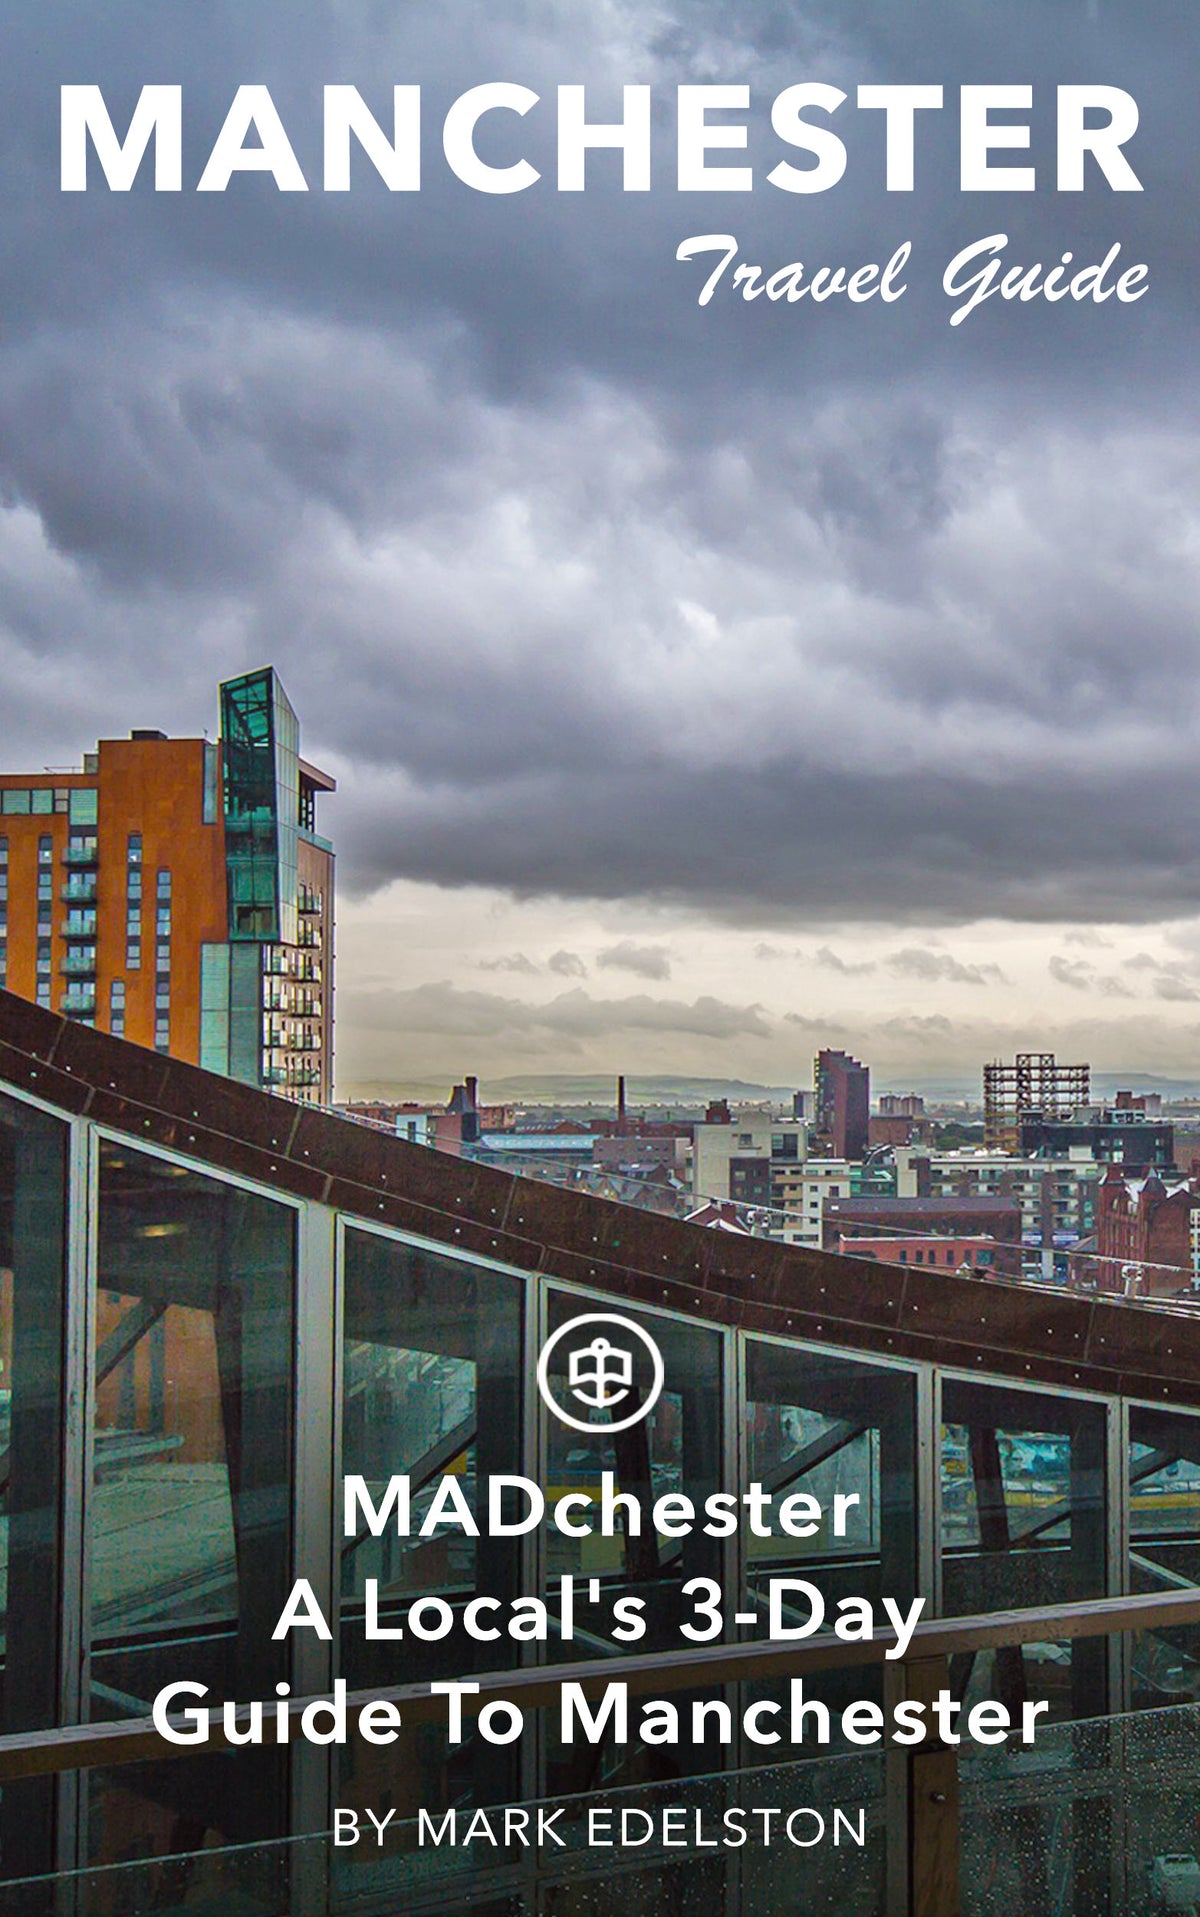 MADchester - A Local's 3-Day Guide To Manchester